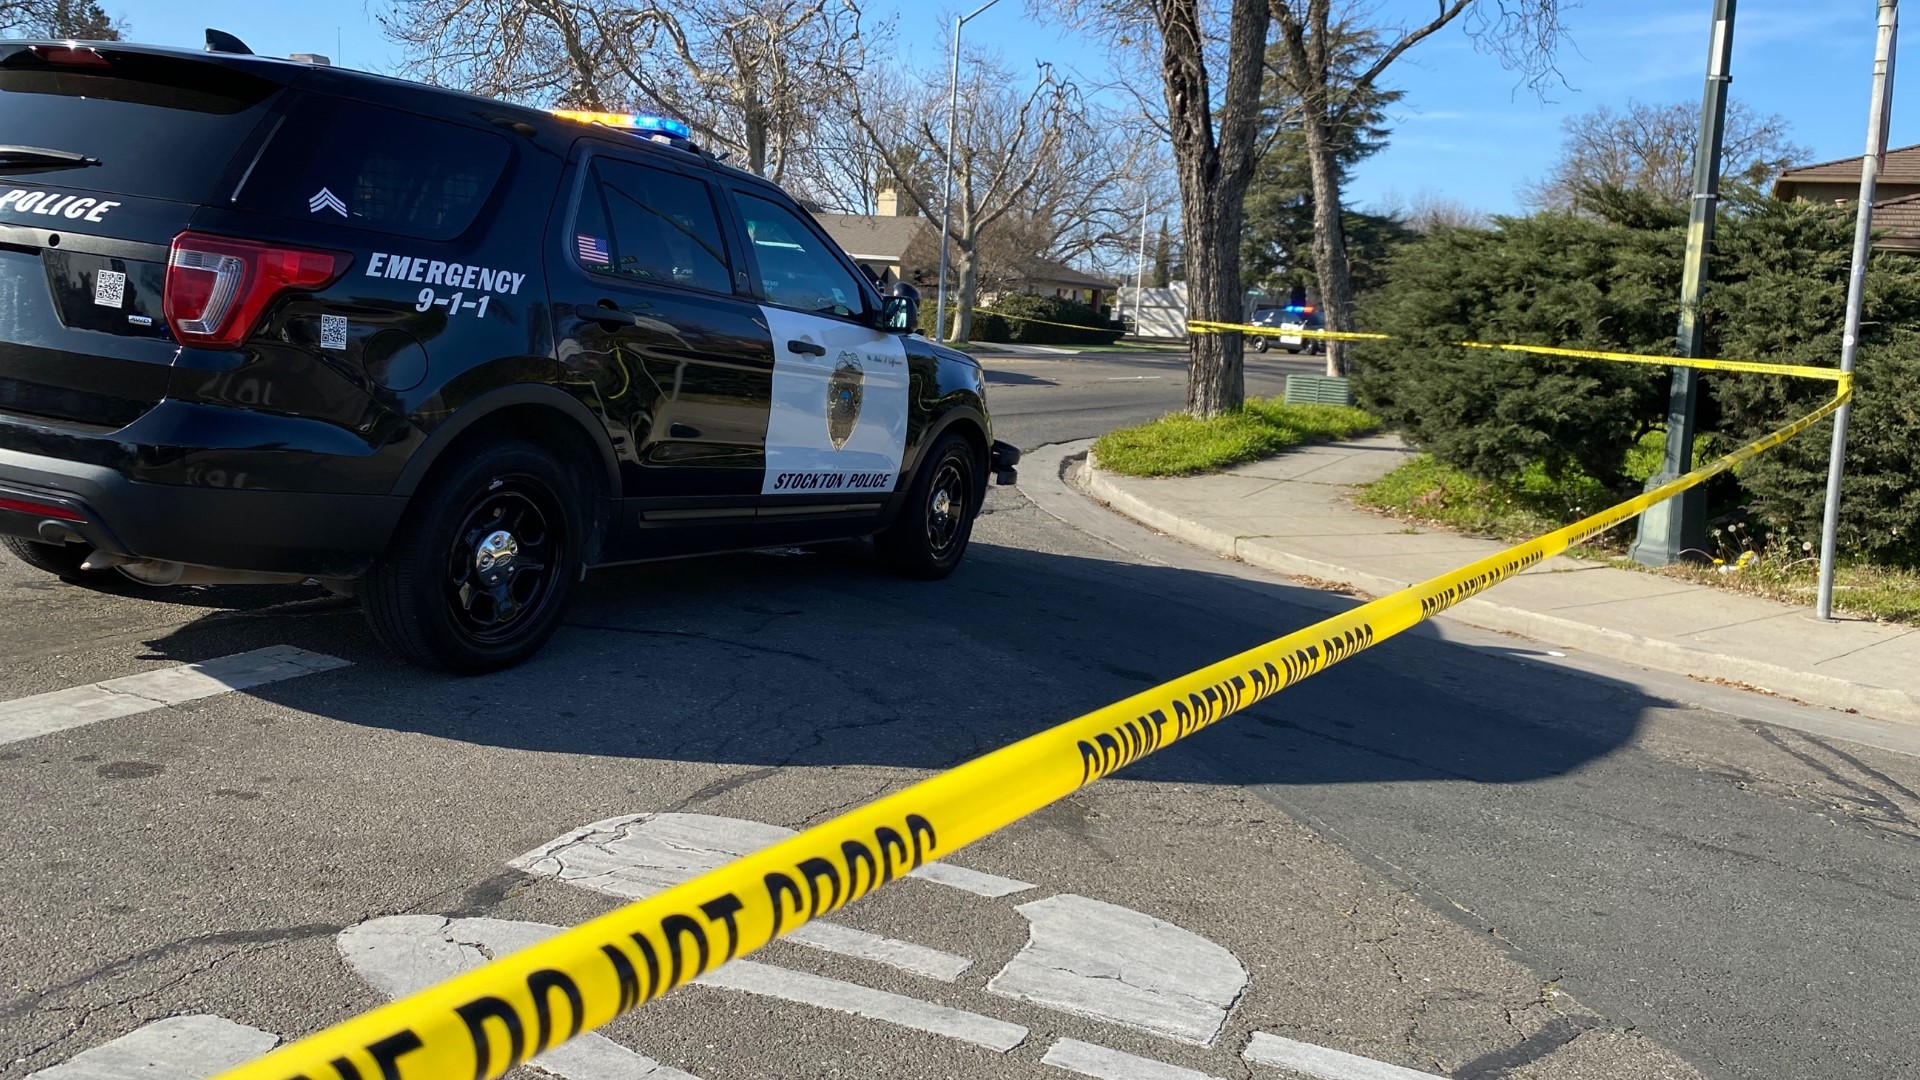 The Stockton Police Department has opened an investigation after a car crashed into a tree near Michigan and Pershing avenues.